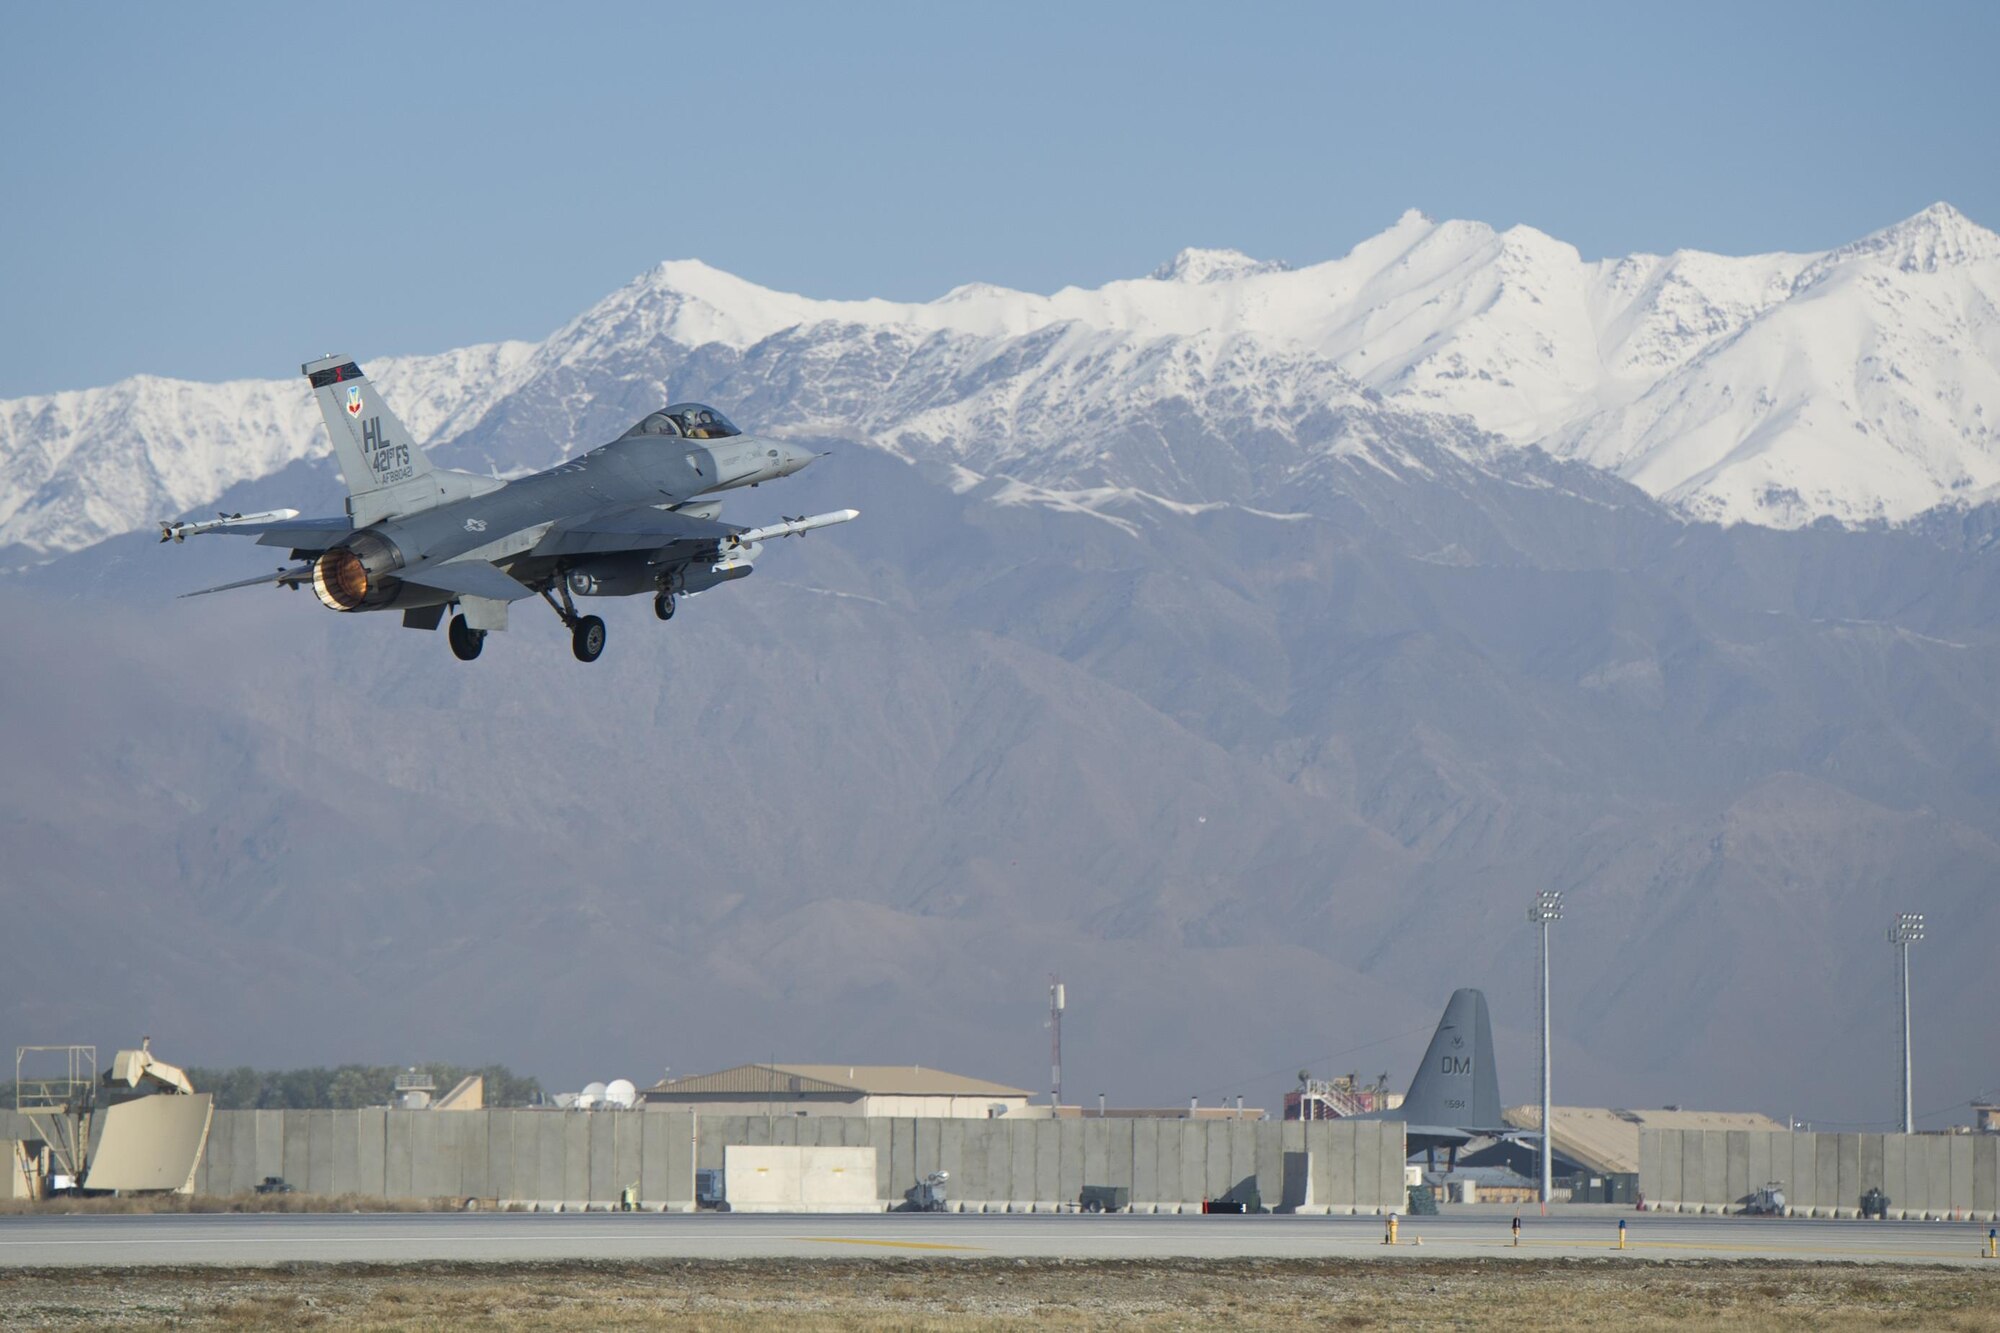 Col. Henry Rogers, 455th Expeditionary Operations Group commander, takes off on a sortie in an  F-16 Fighting Falcon with the 421st Expeditionary Fighter Squadron at Bagram Airfield, Afghanistan, Nov. 27, 2015. Rogers reached the 3,000-flying hour milestone and 1,000 combat-hour milestone while serving on his eighth combat deployment flying F-16s. (U.S. Air Force photo by Tech. Sgt. Robert Cloys/Released)